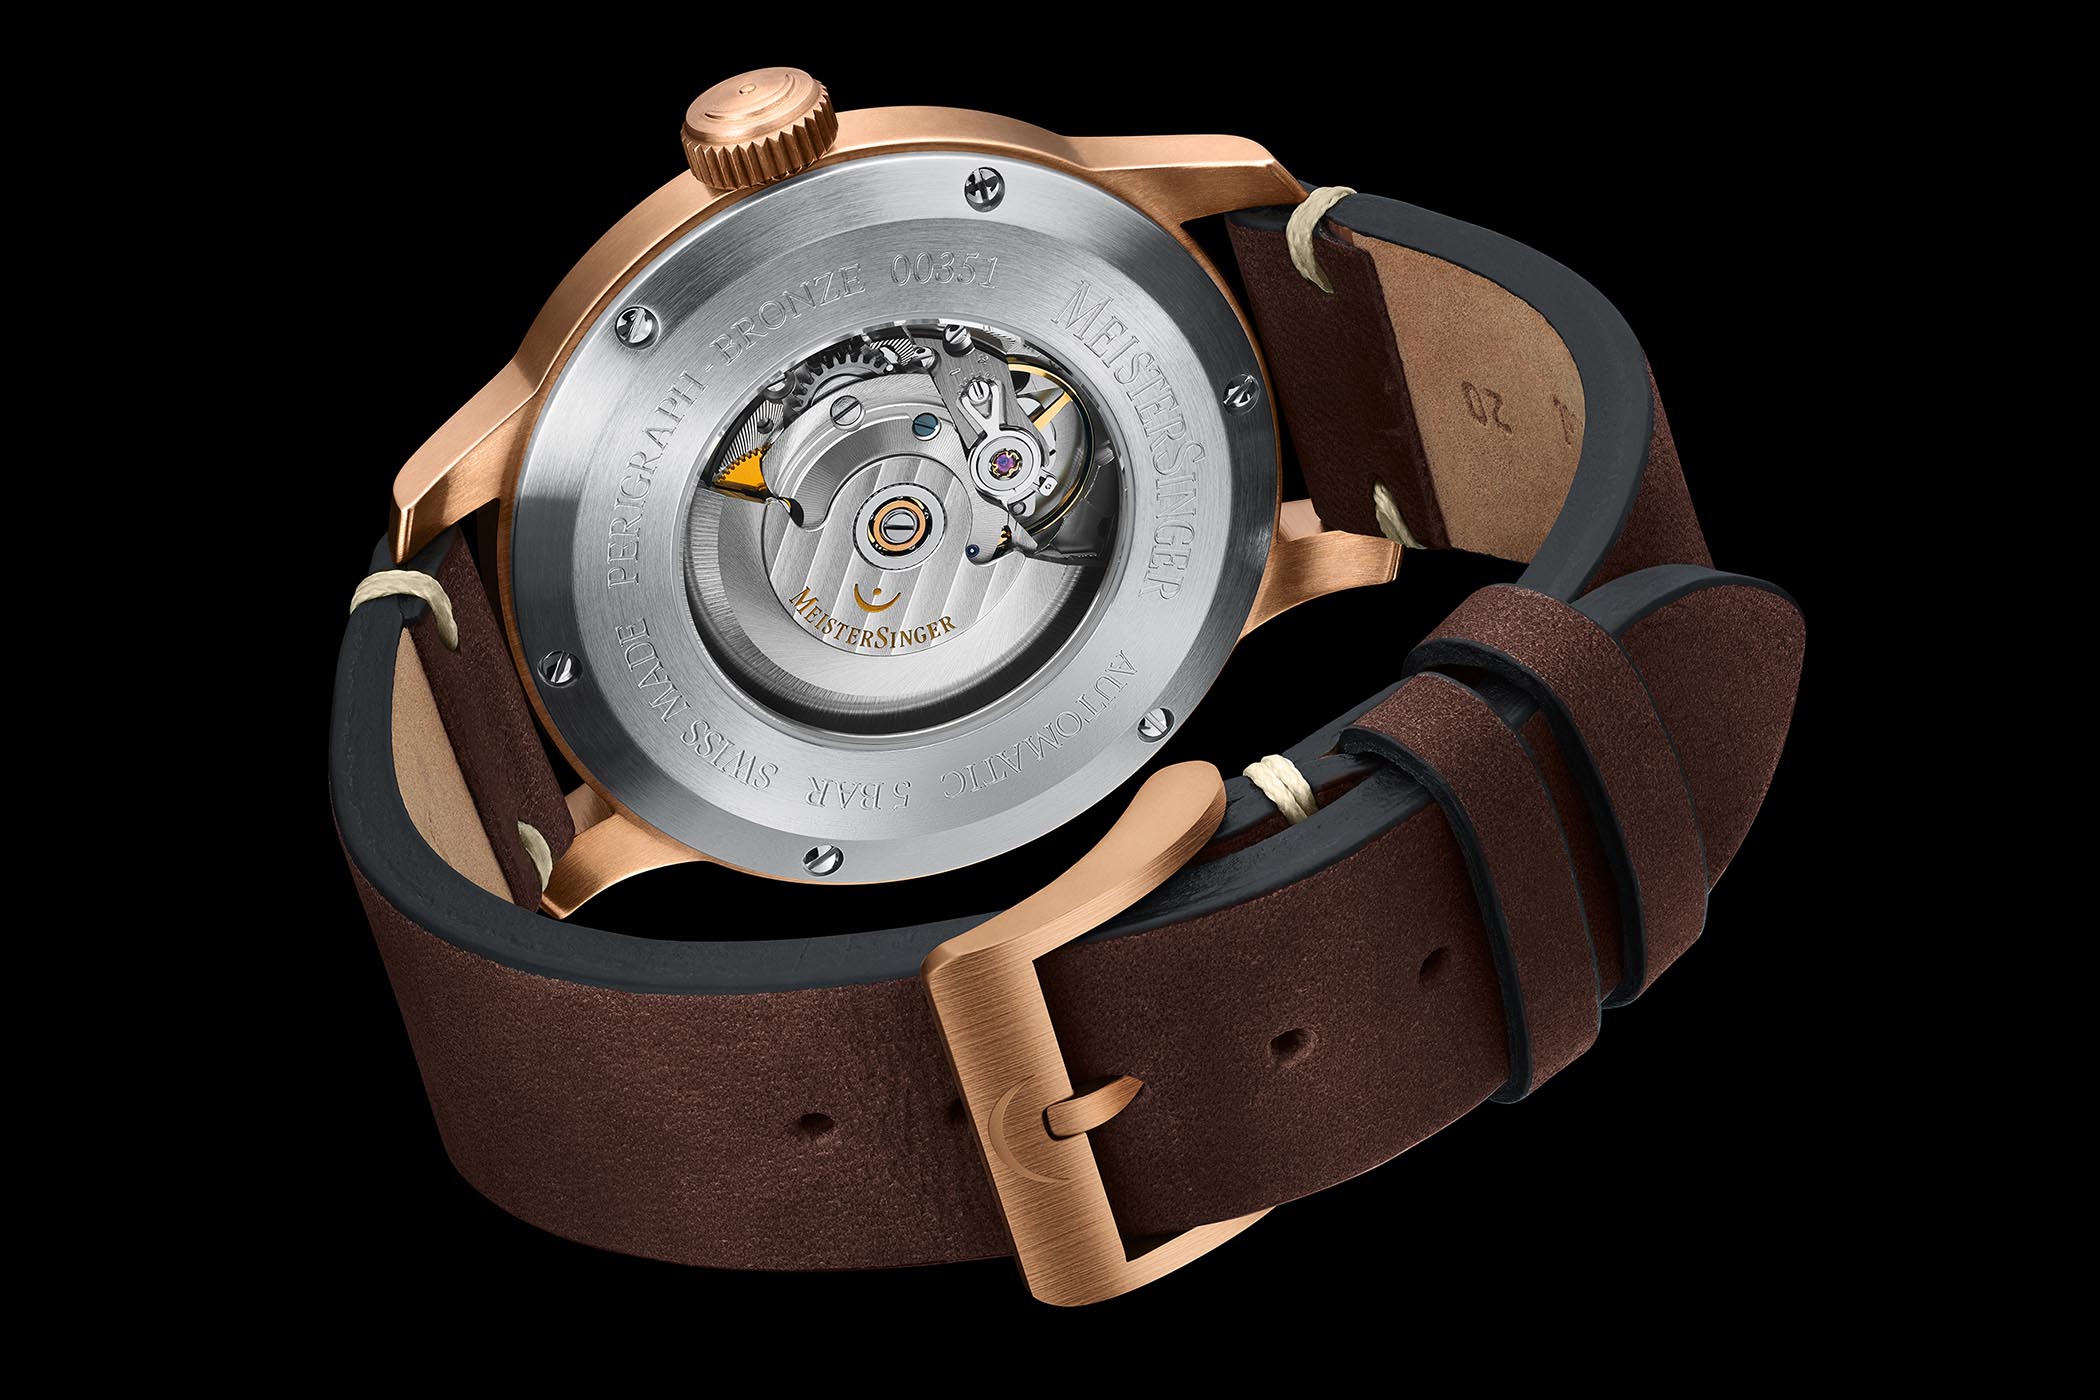 Baselworld 2019 - MeisterSinger Bronze Editions No. 03, Perigraph and Metris - 6